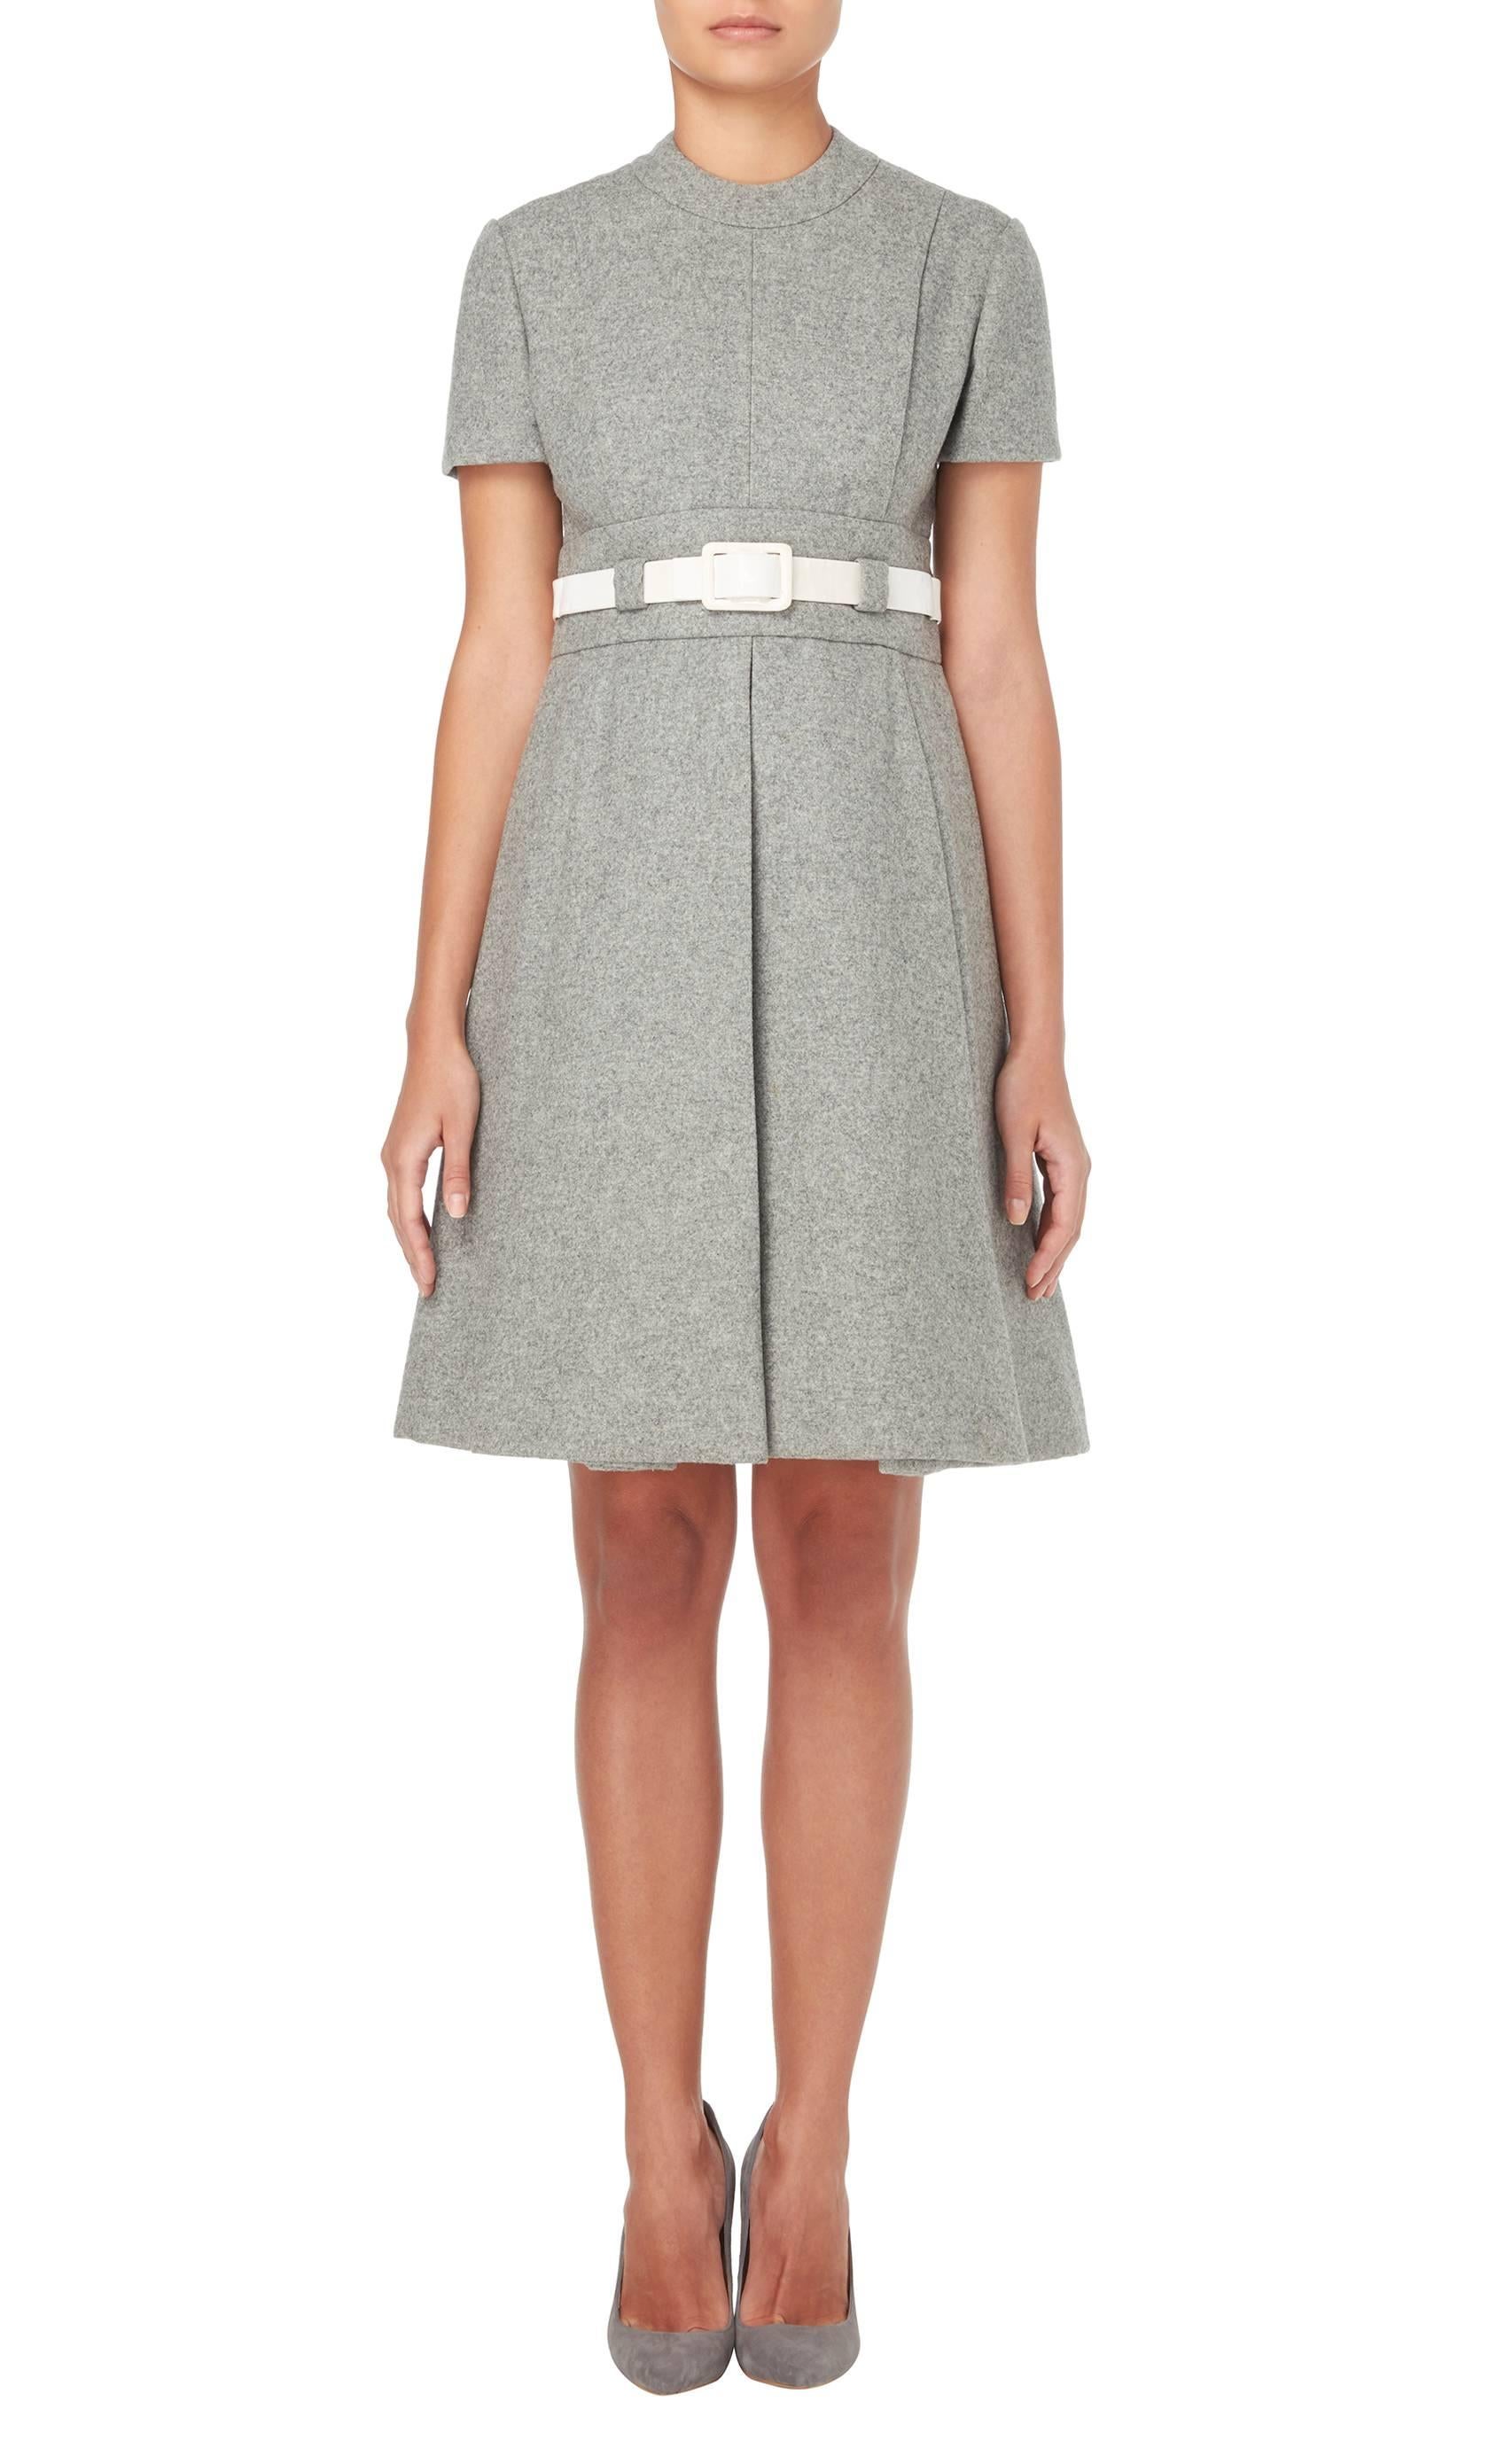 Constructed in grey wool-felt
Featuring a white vinyl belt and box pleated skirt
Zip fastening to rear
Excellent condition with the original label, lining and fastenings
Professionally dry cleaned and ozone-treated
Inspected by a